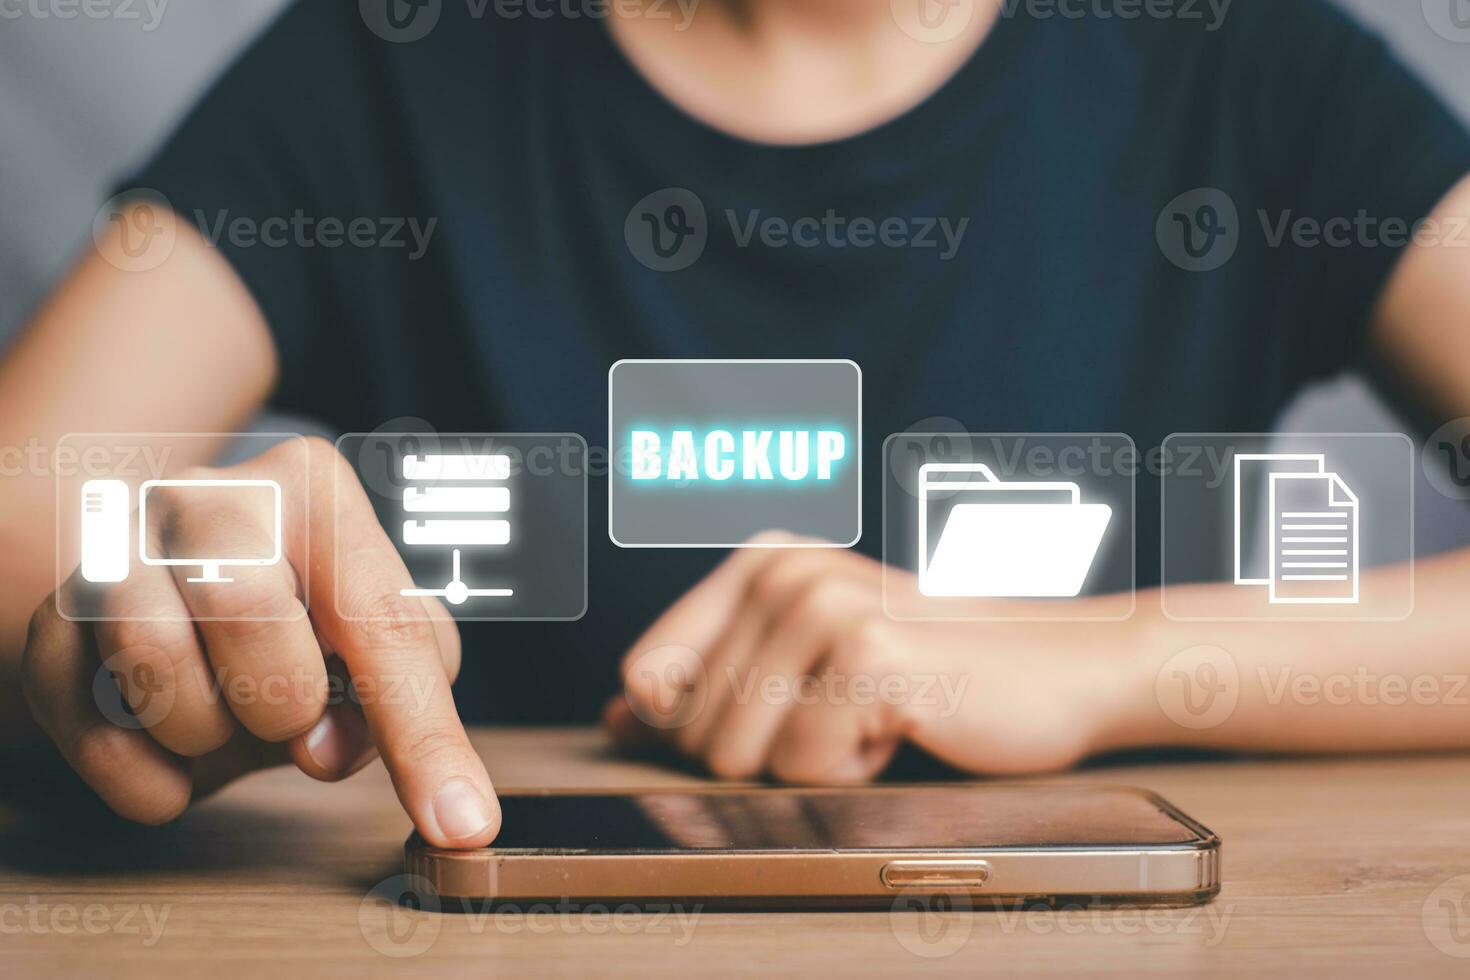 Backup storage data internet technology business concept, Business woman using smartphone with VR screen backup icon on desk. photo